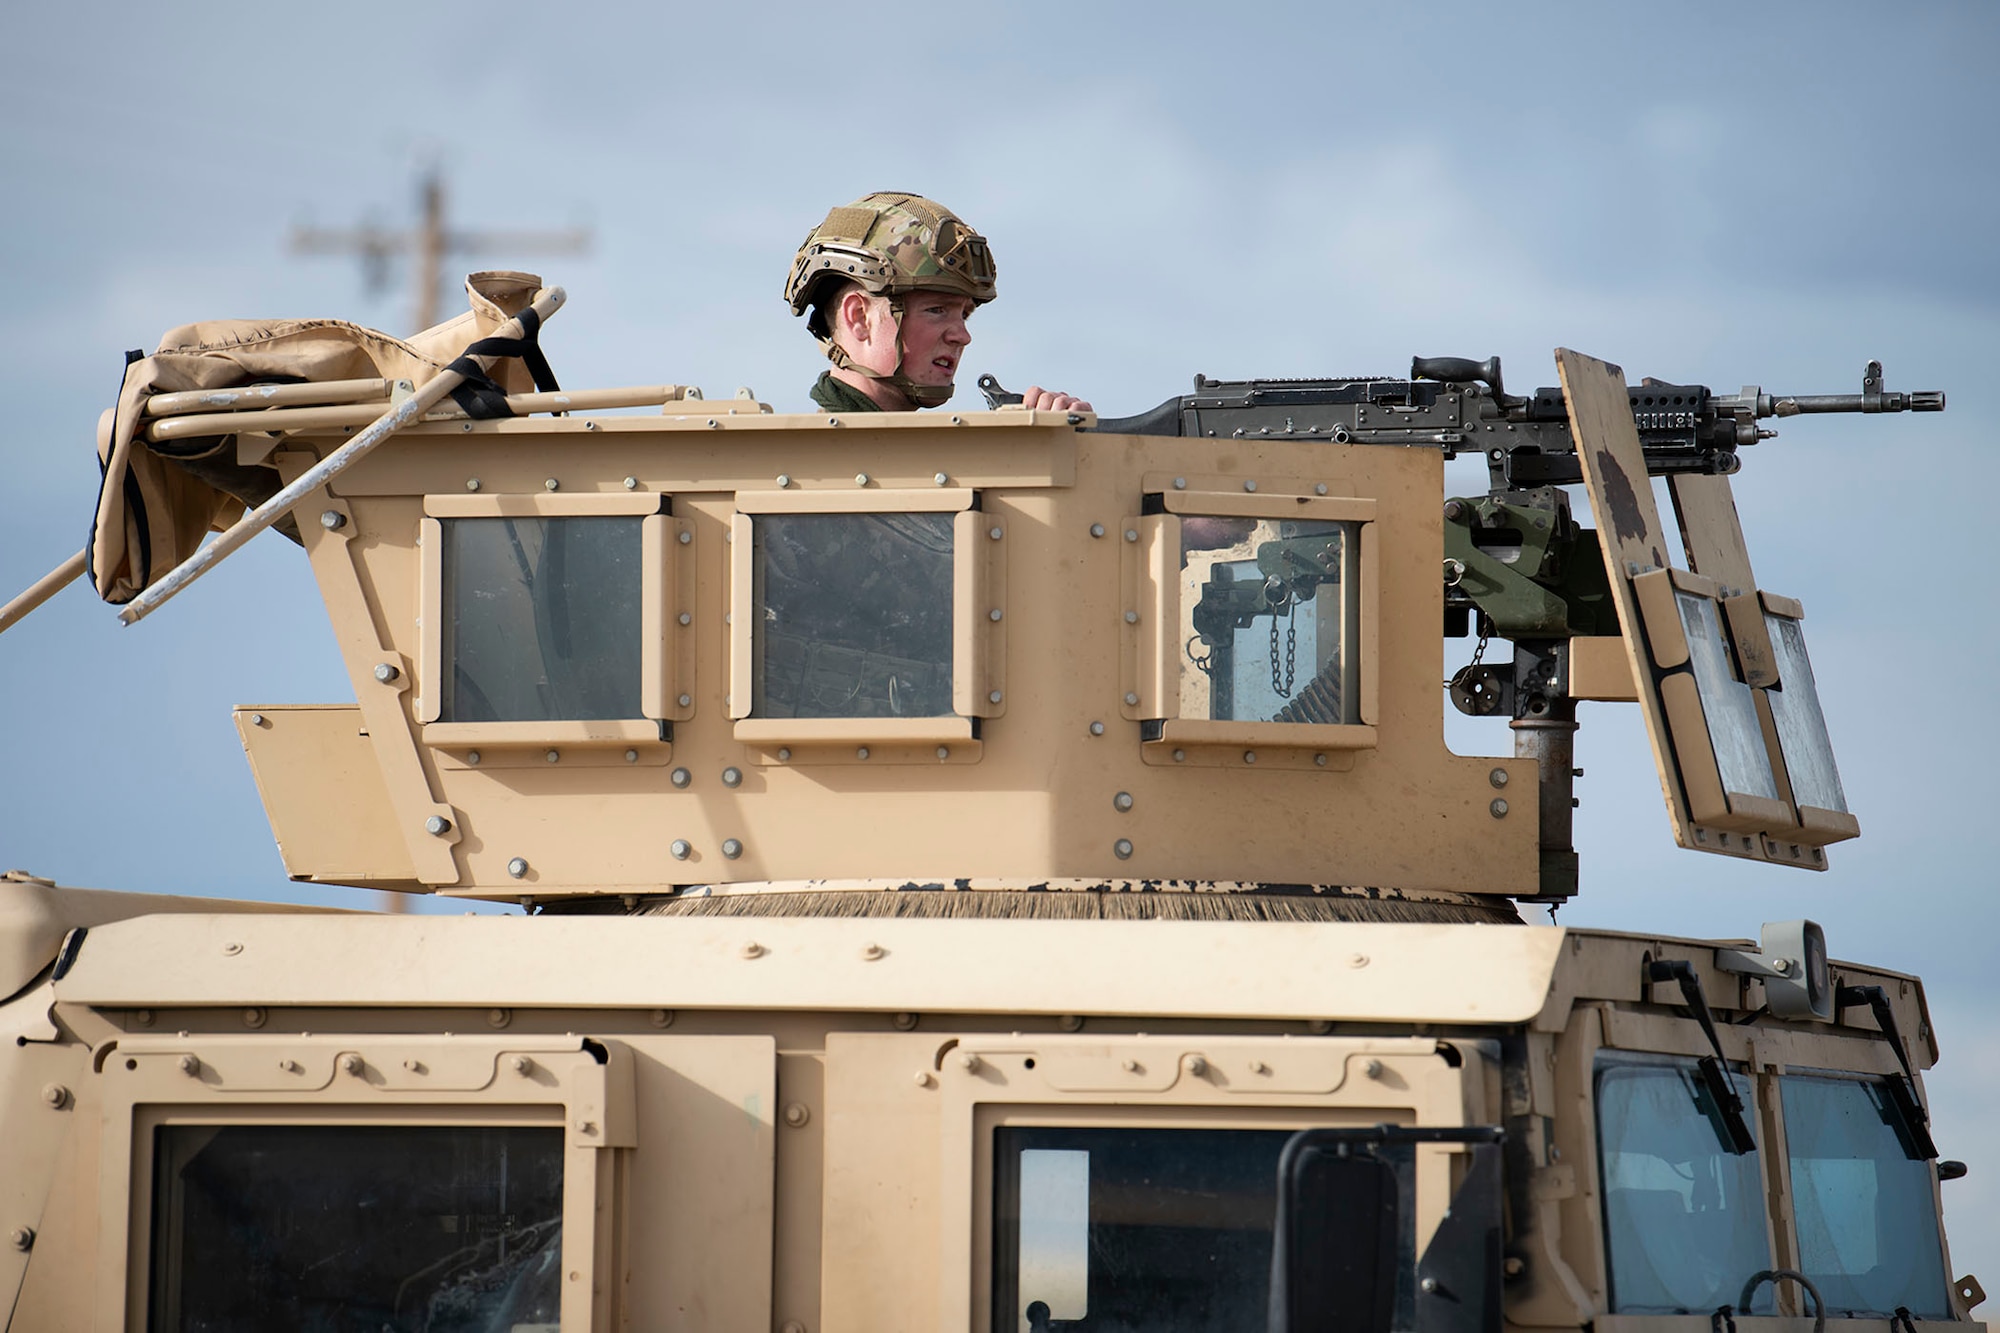 Defender sits in the turret of Humvee and looks towards the right side of the frame towards the distance.